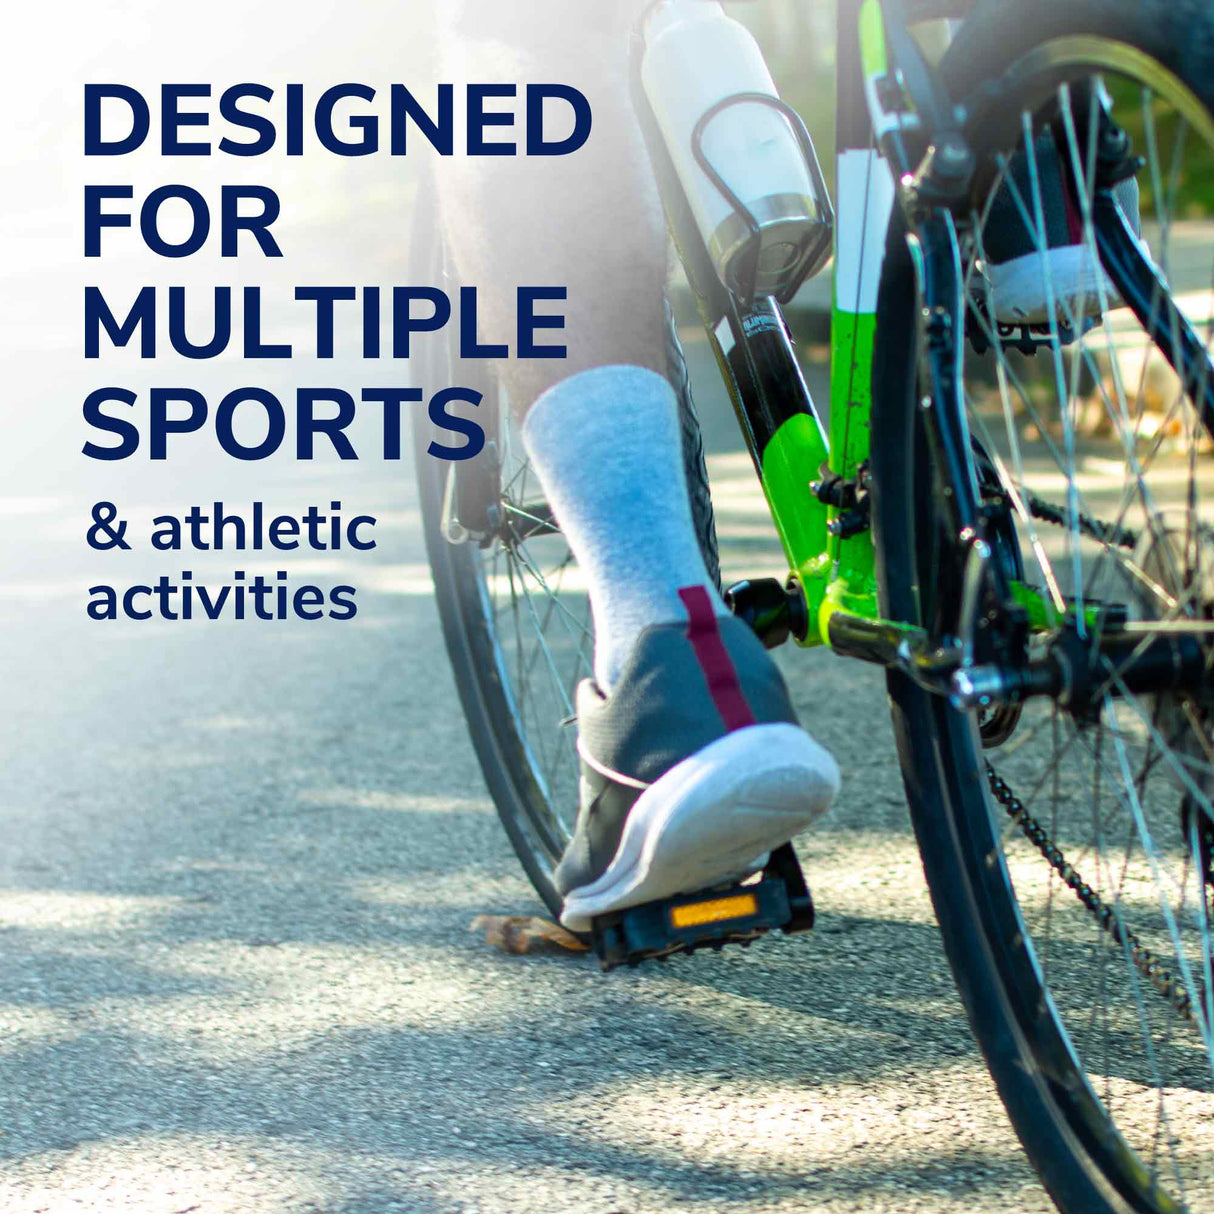 image of designed for multiple sports and athletic activities